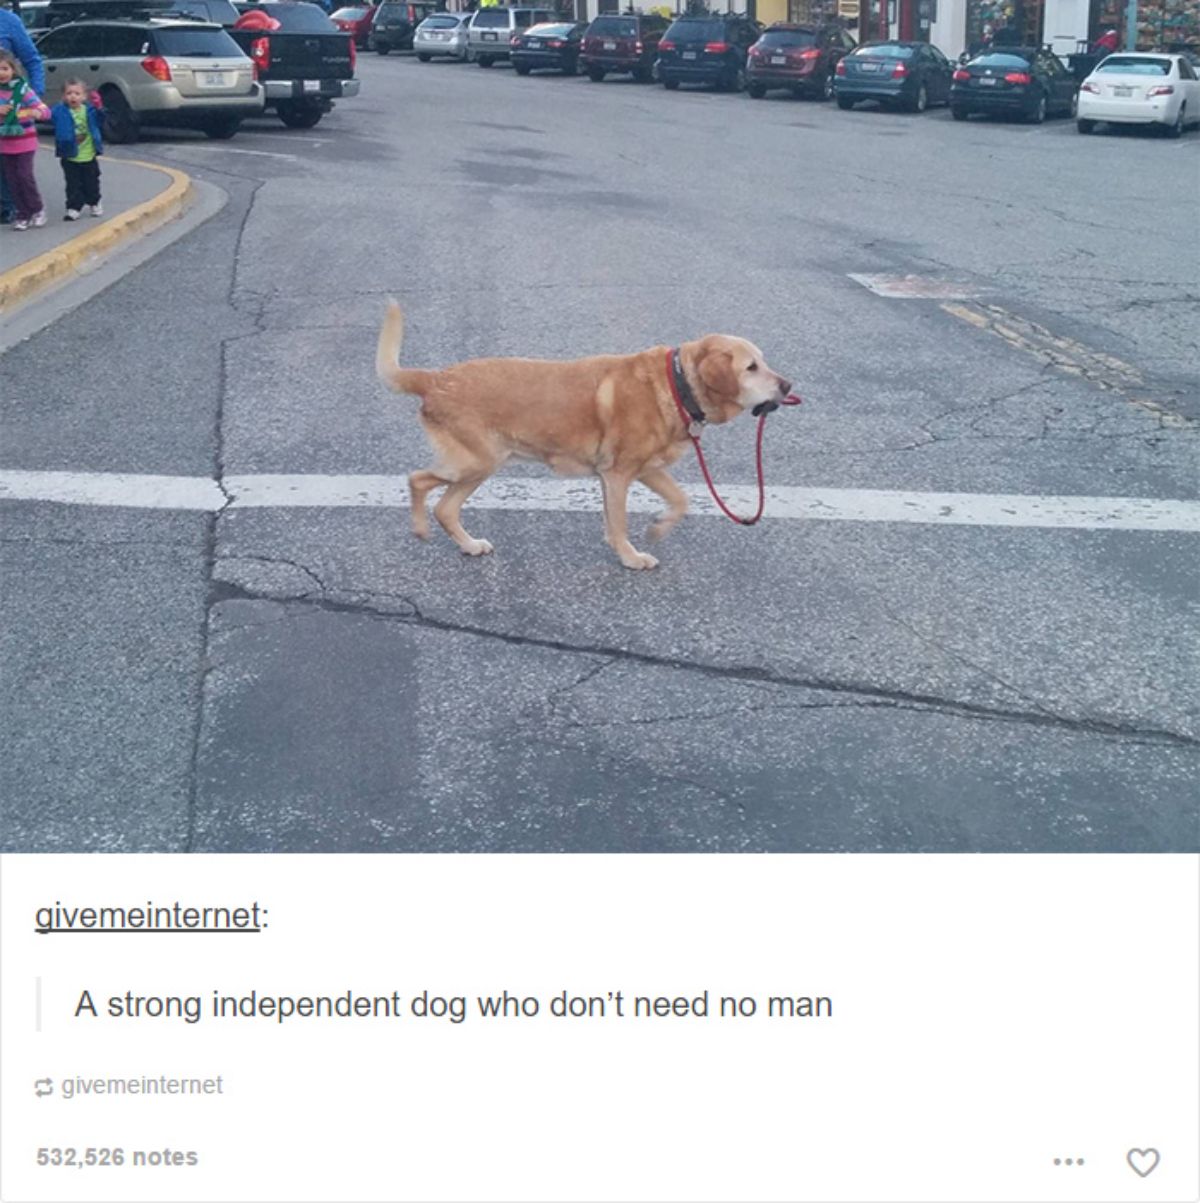 brown dog walking on a road holding its own red leash